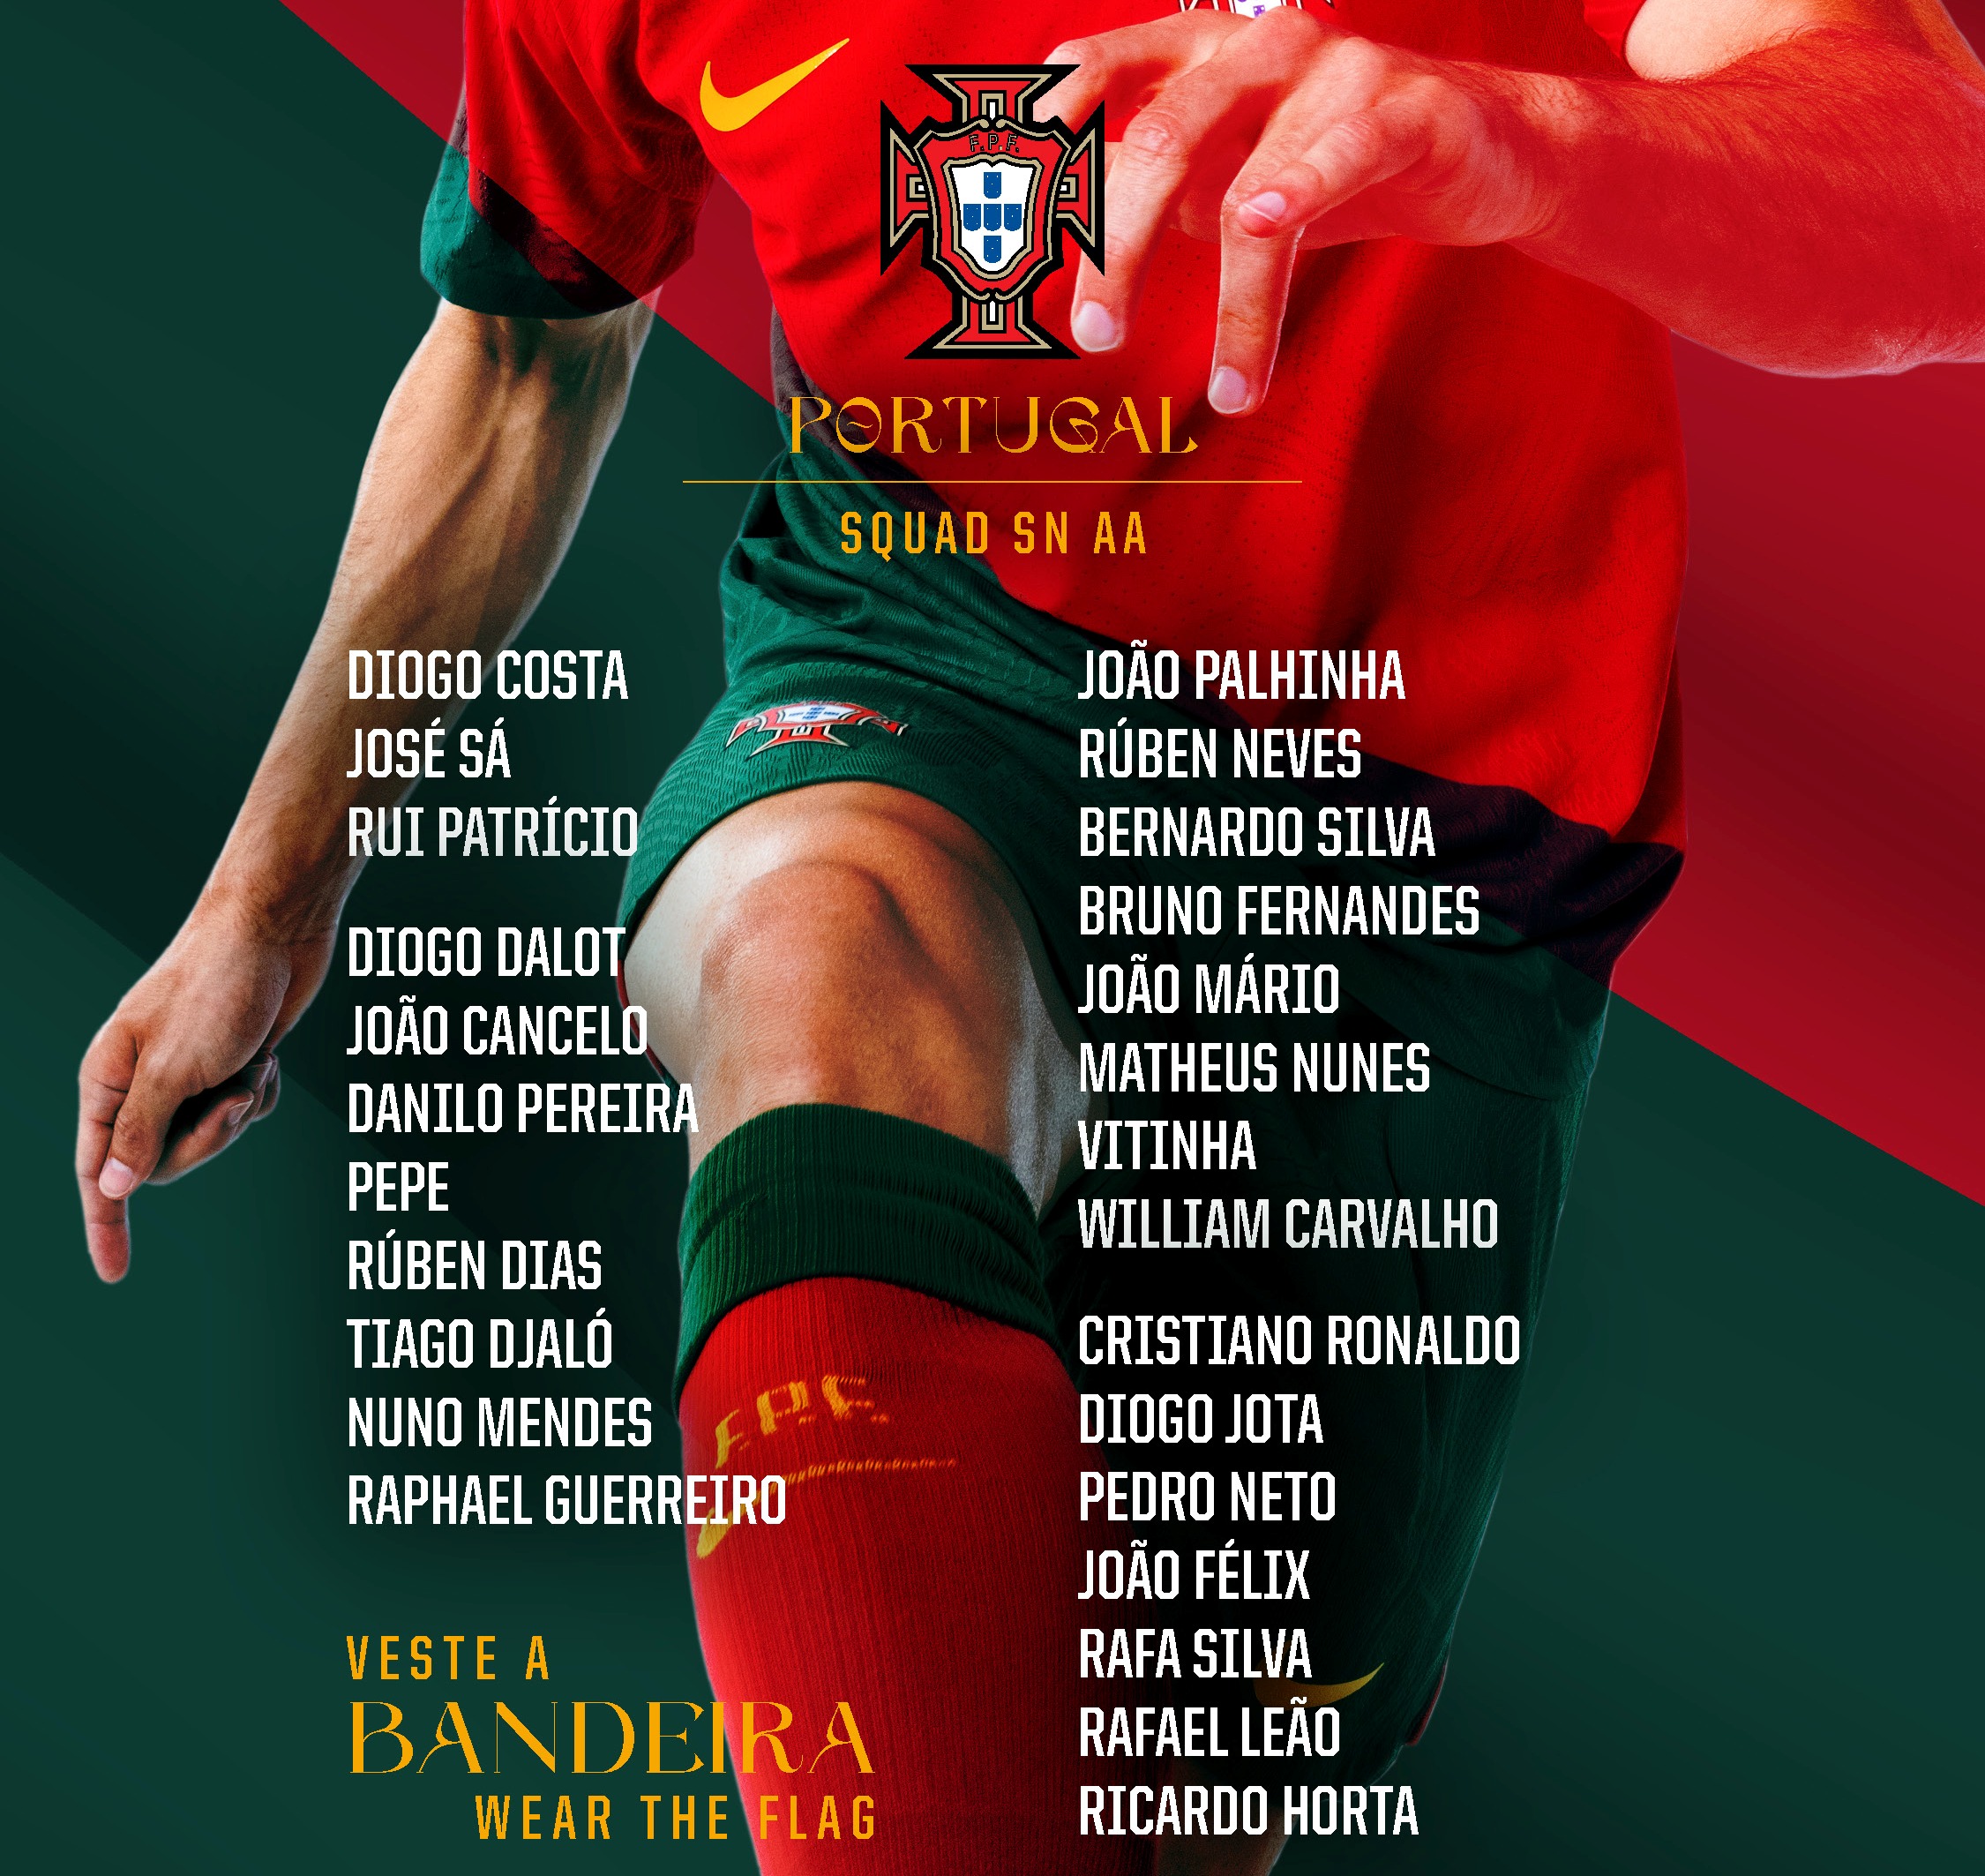 Фото: Twitter / @selecaoportugal